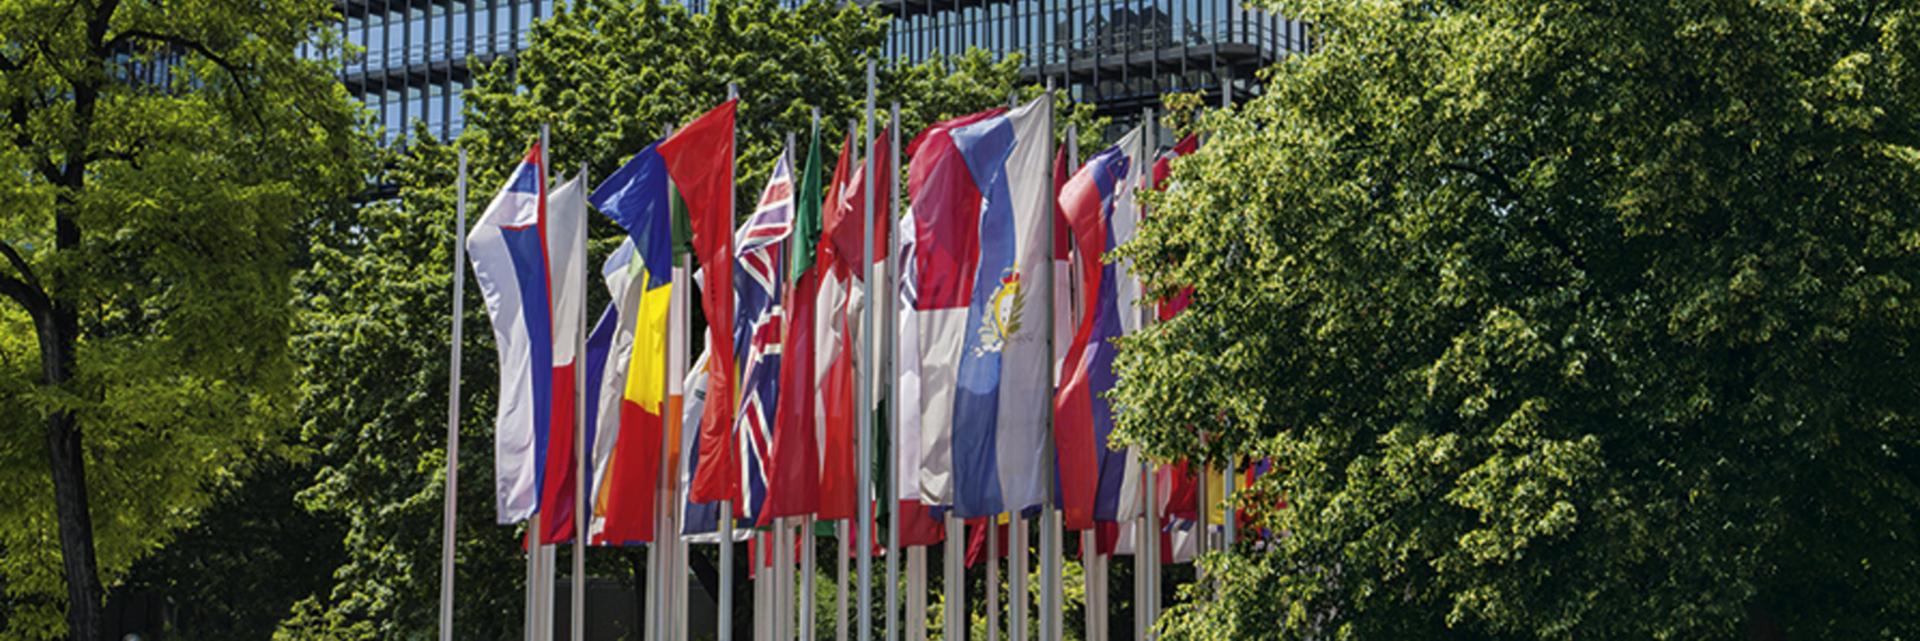 Hosited country flags in front of EPO building in Munich near Isar